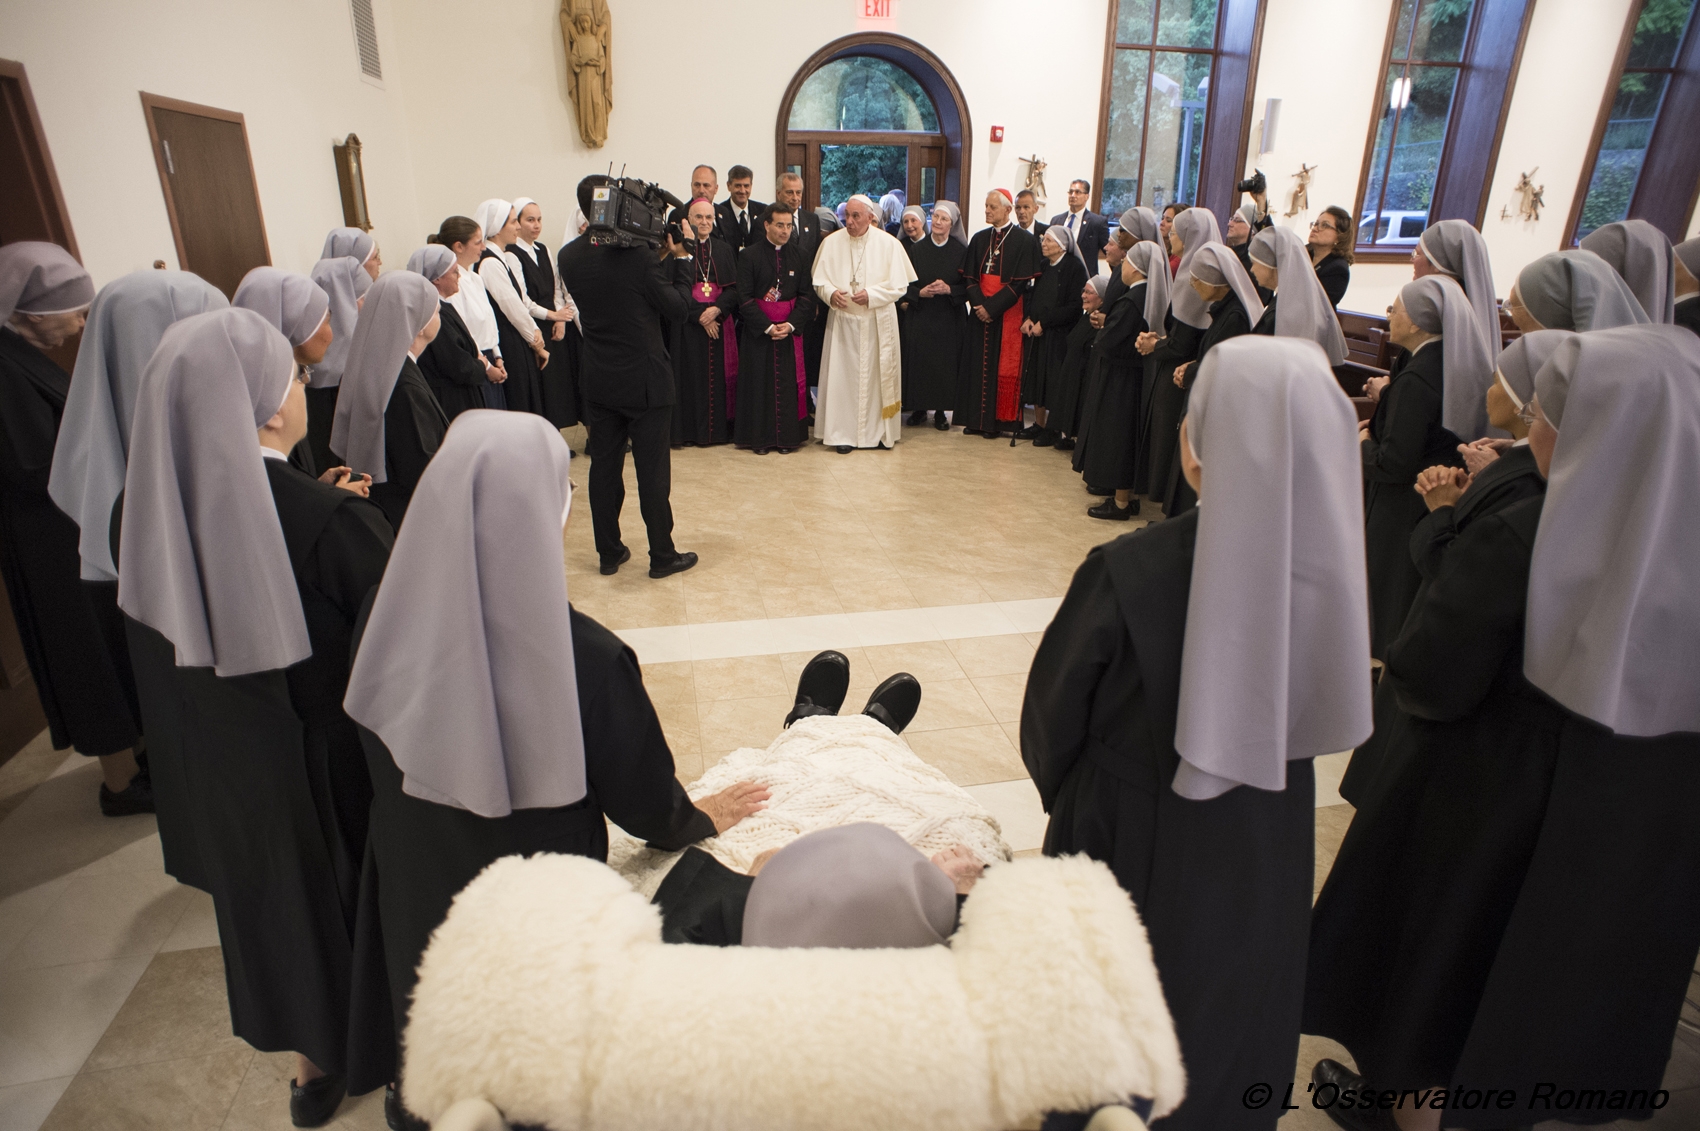 Pope Francis during his surprise visit to the Little Sisters of the Poor in Washington